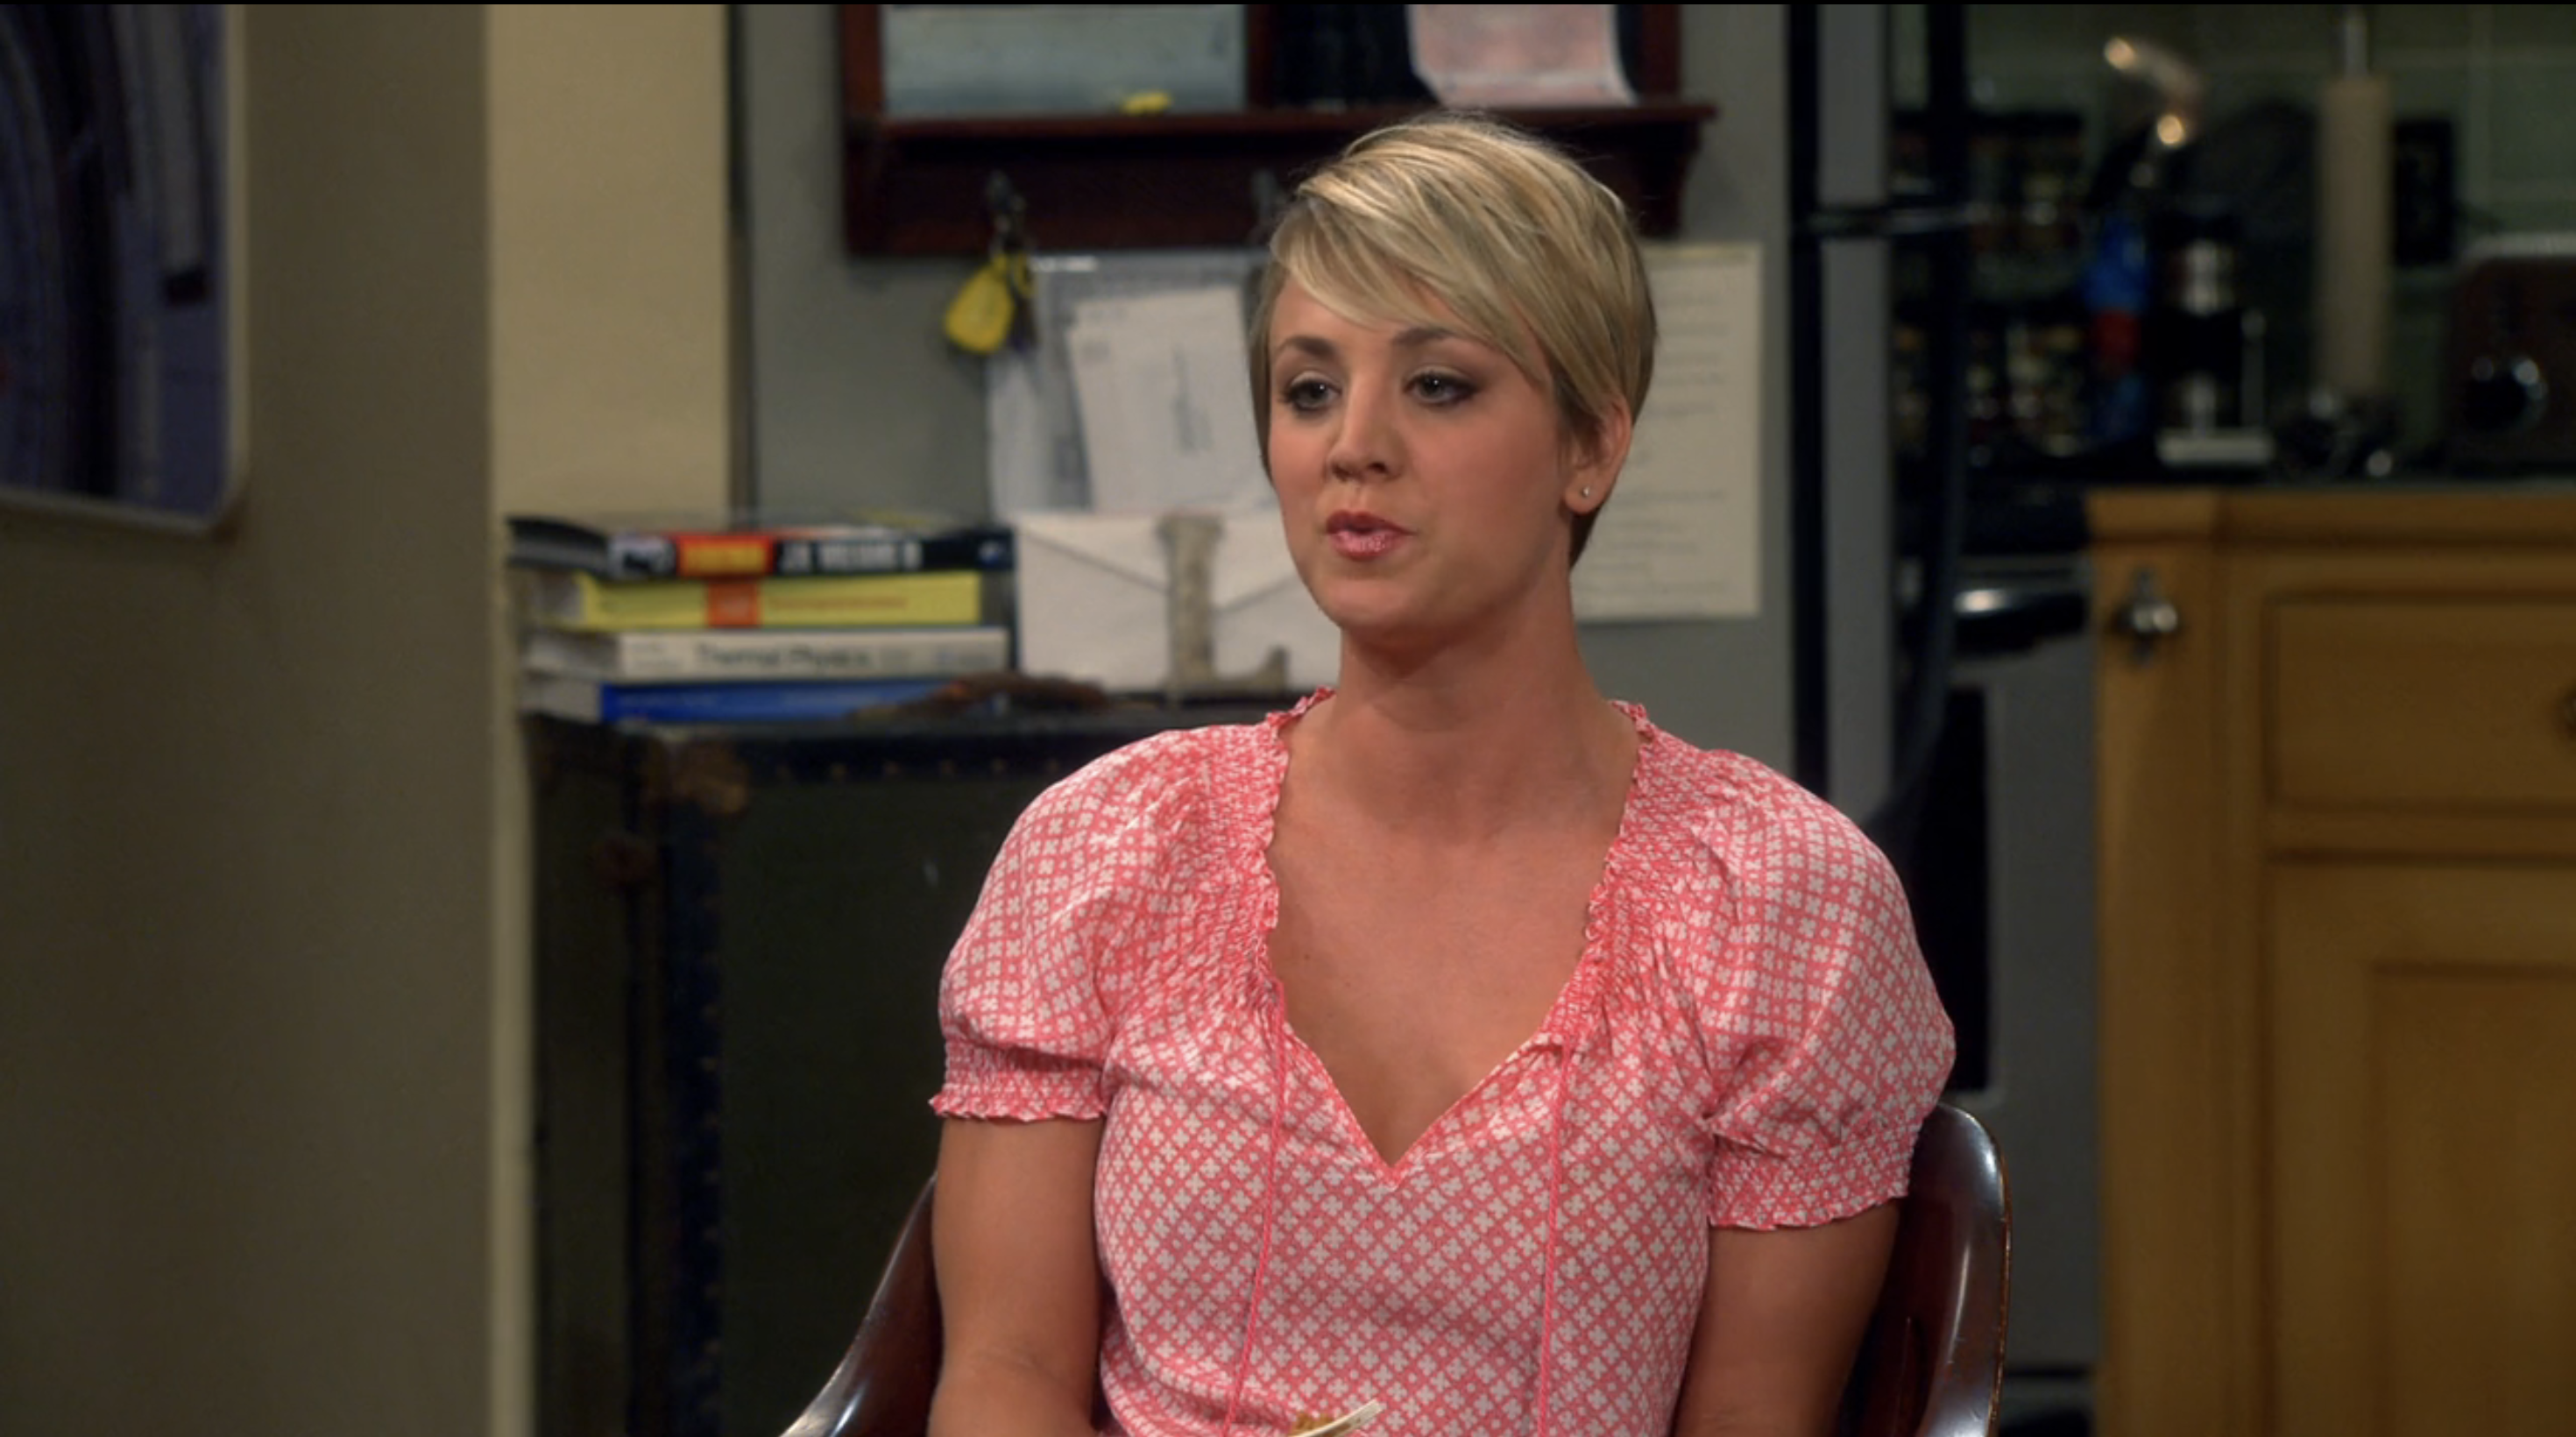 Woman in pink polka dot blouse and short hair sitting in a living room, from a TV show